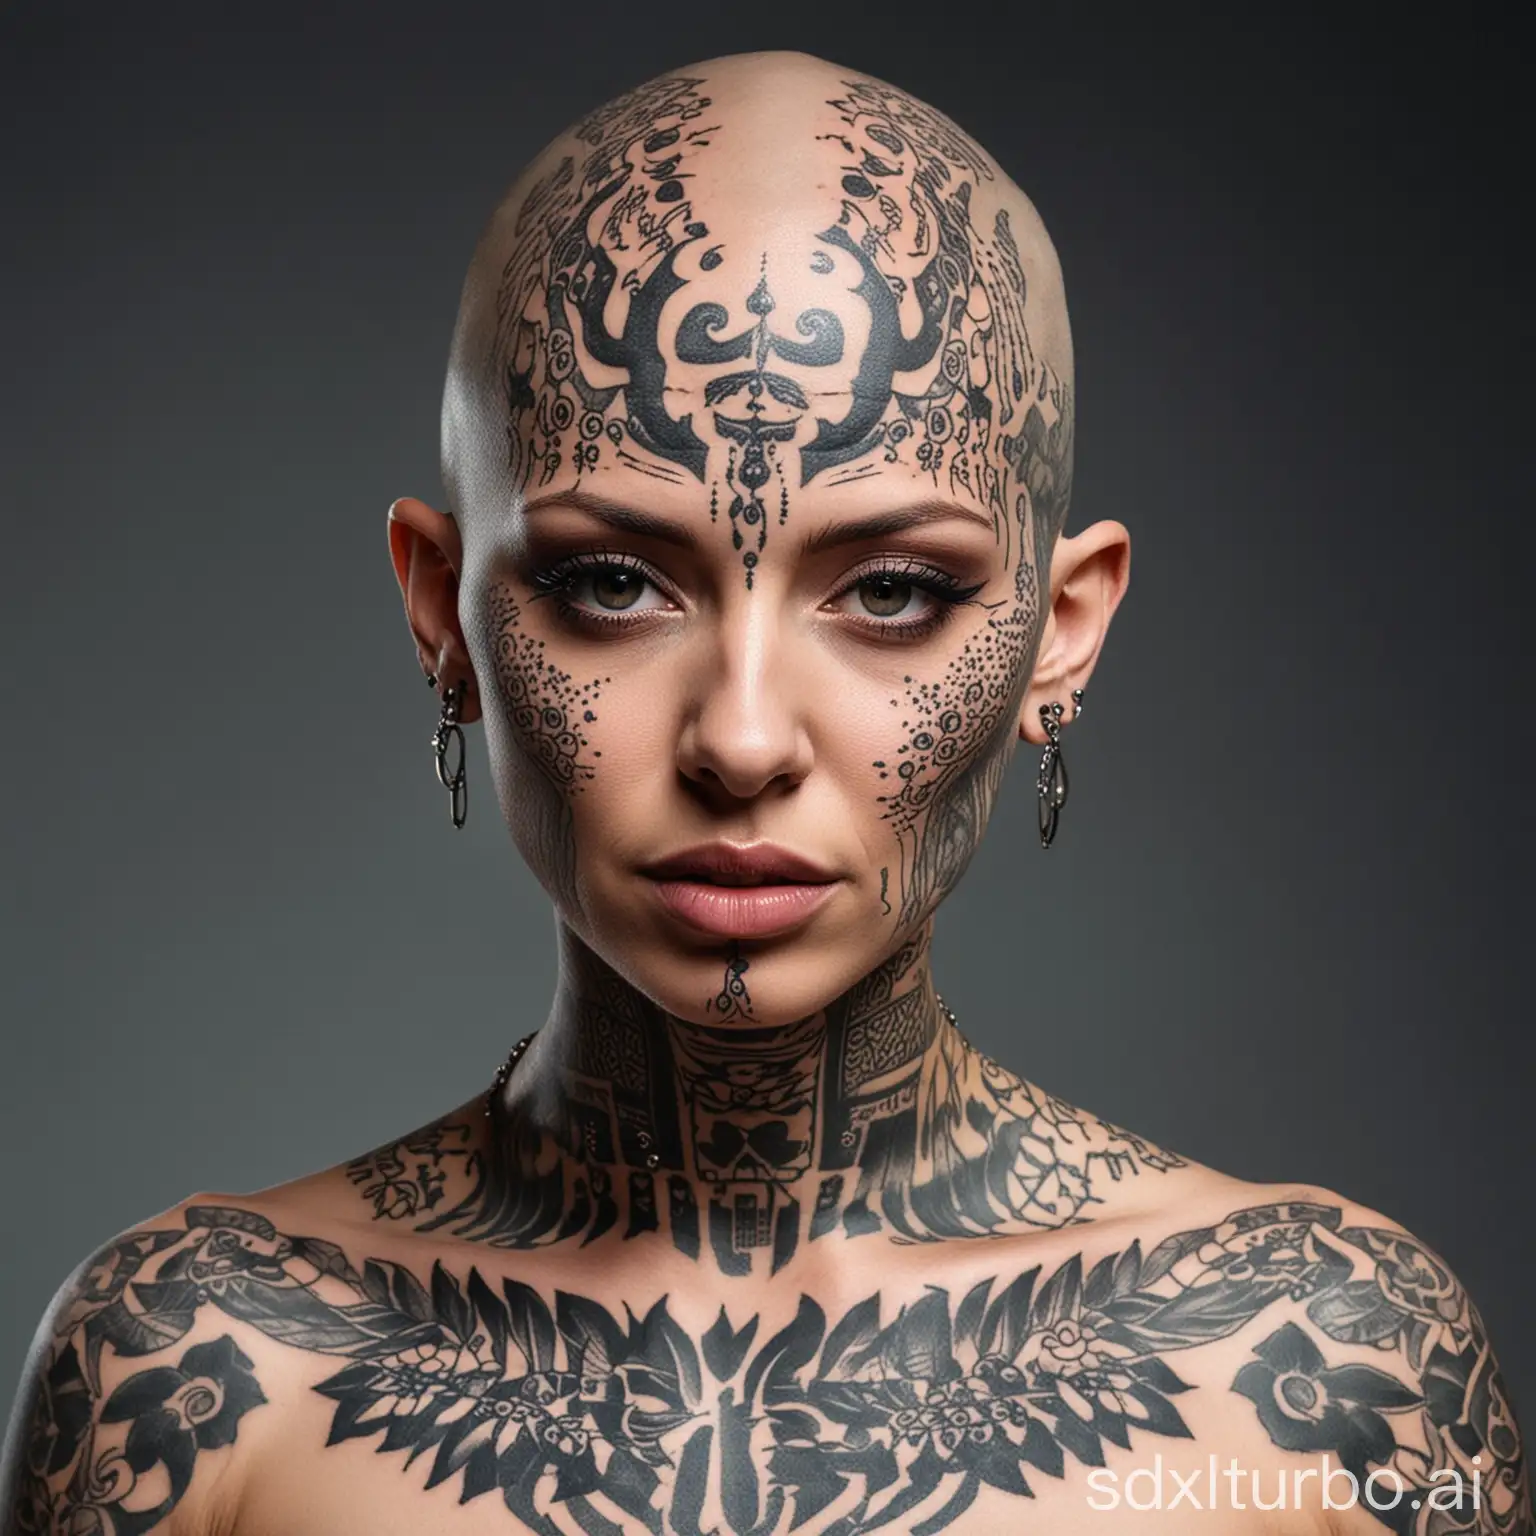 Bold-Head-Woman-with-Excessive-Tattoos-and-Piercings